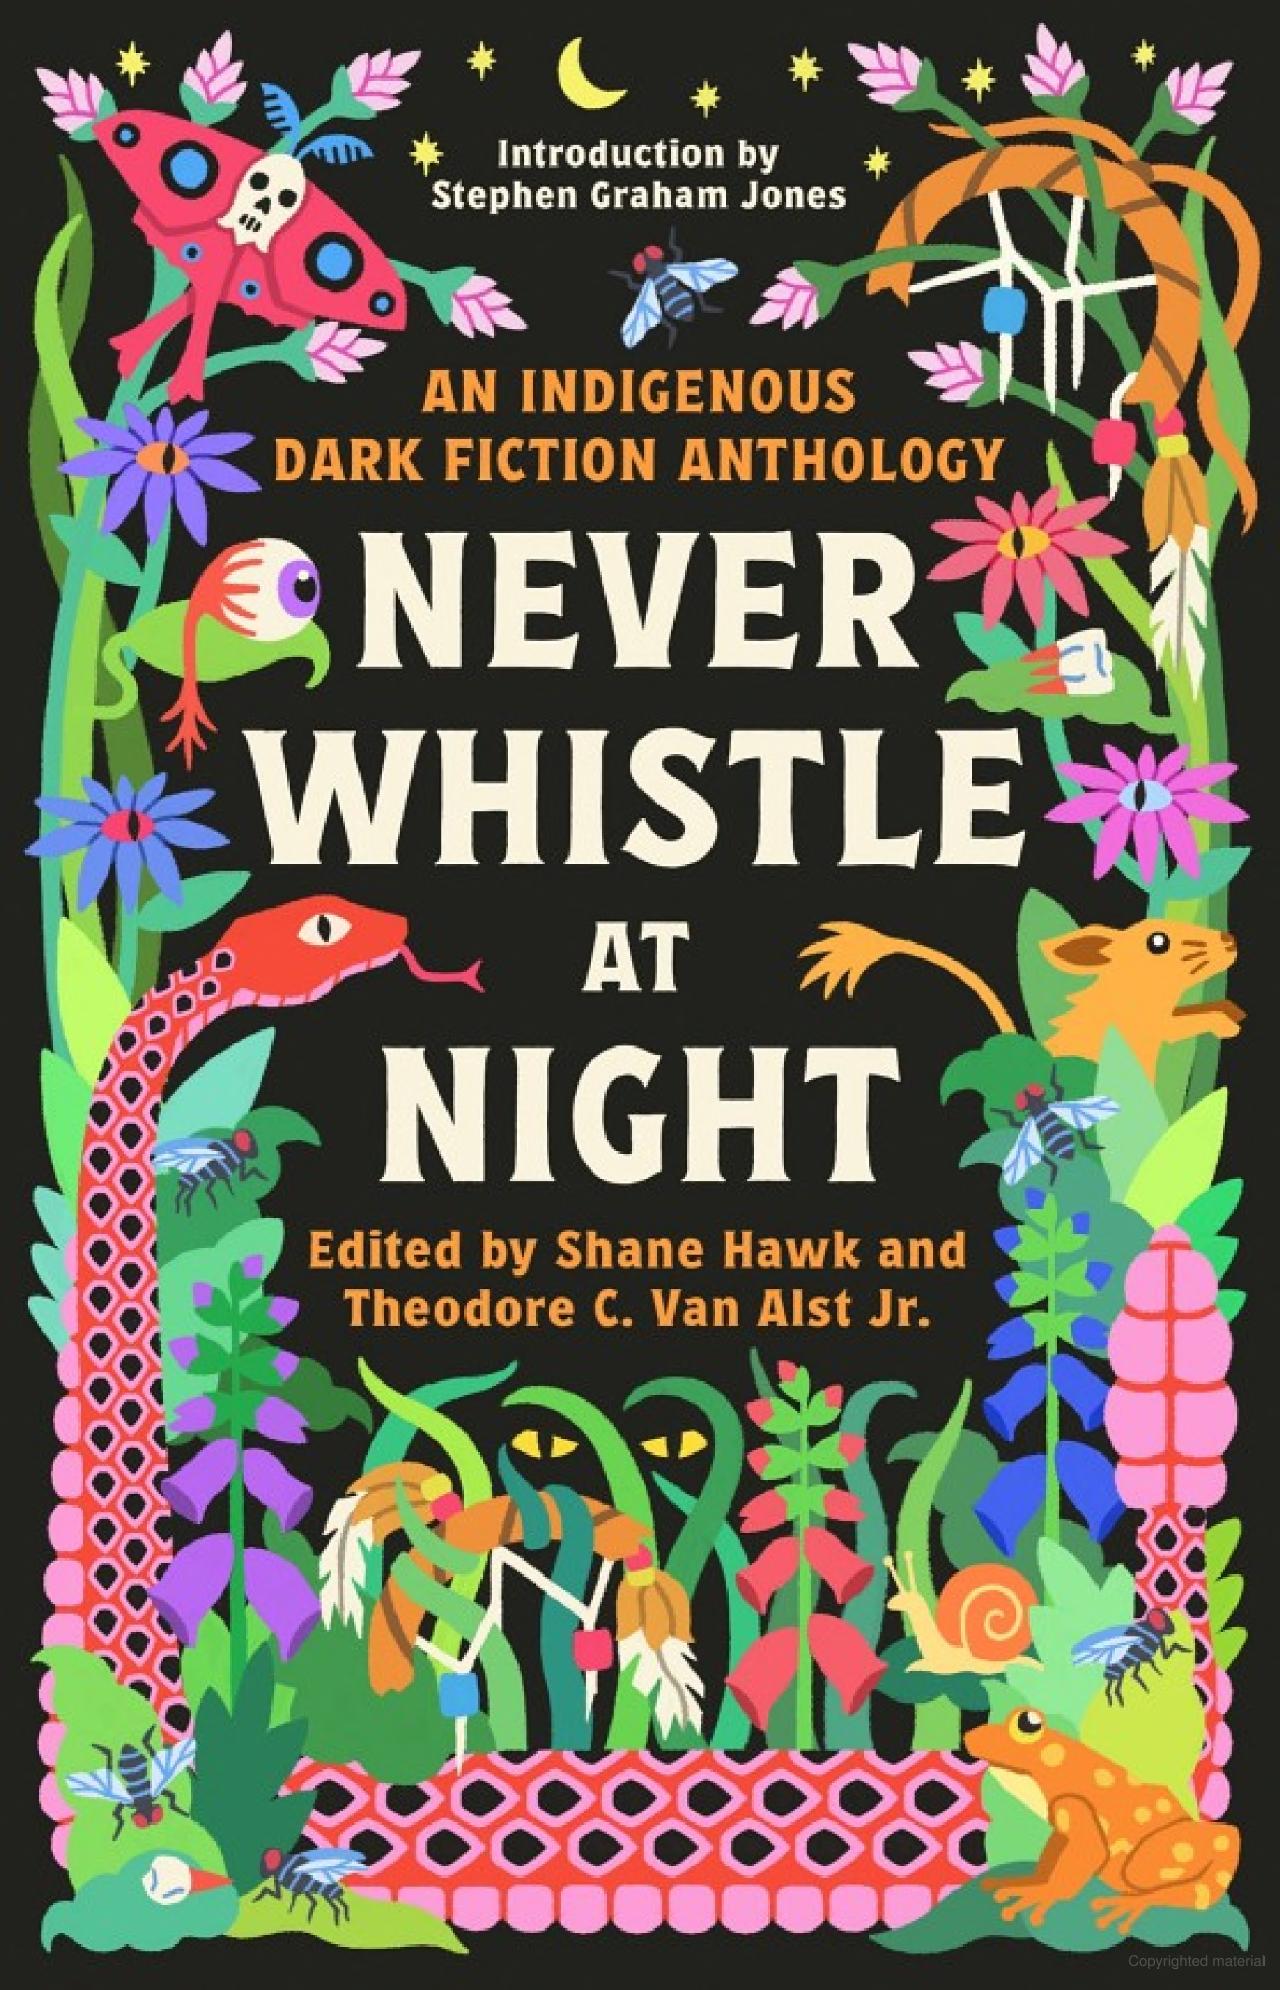 Never Whistle at Night -Various Authors - The Society for Unusual Books